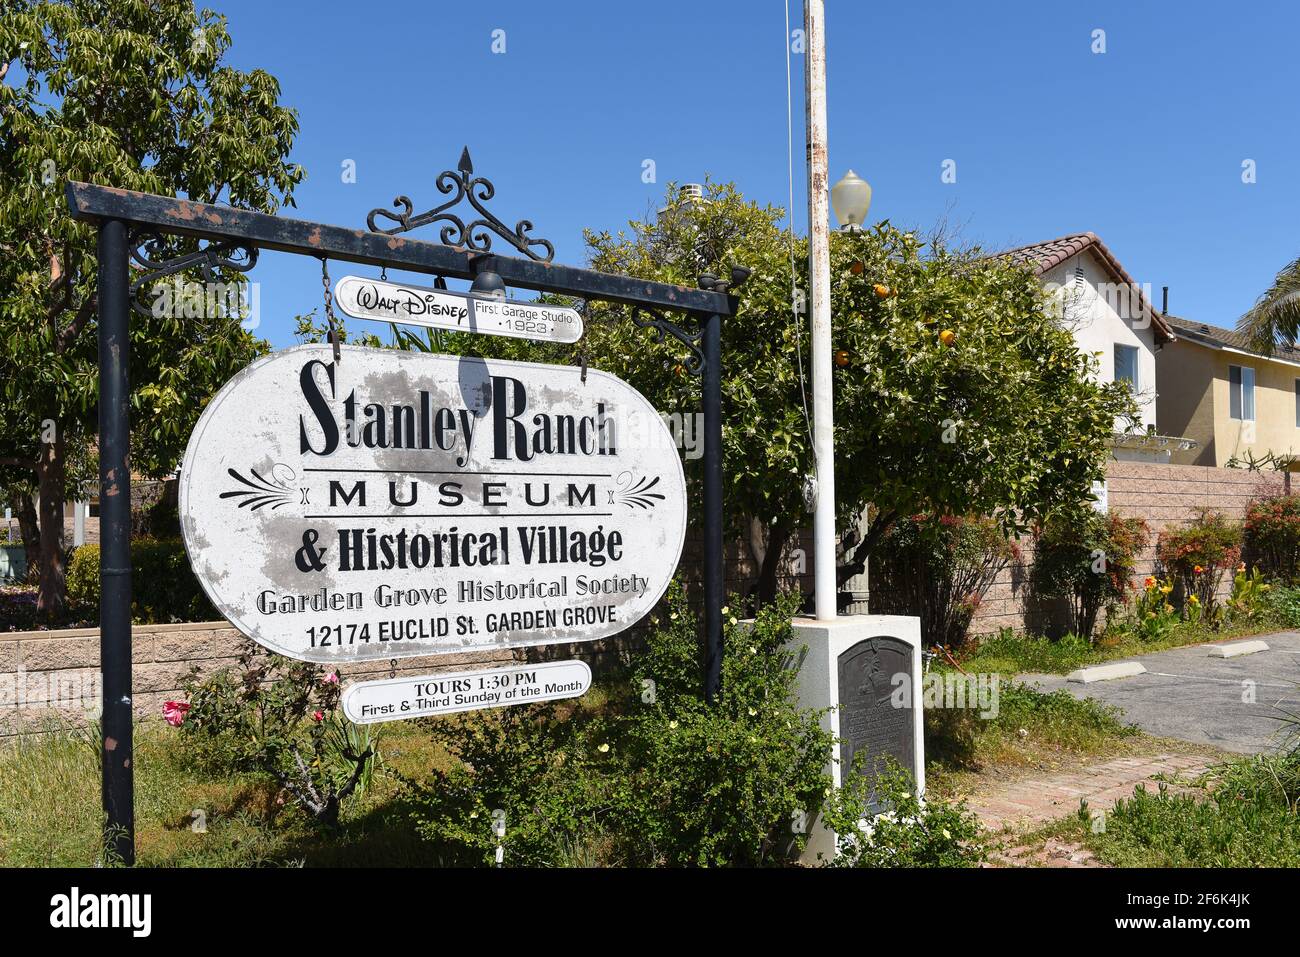 GARDEN GROVE, CALIFORNIA - 31 MAR 2021: Stanley Ranch Museum sign at the entrance to the historic buildings park on Euclid Avenue. Stock Photo